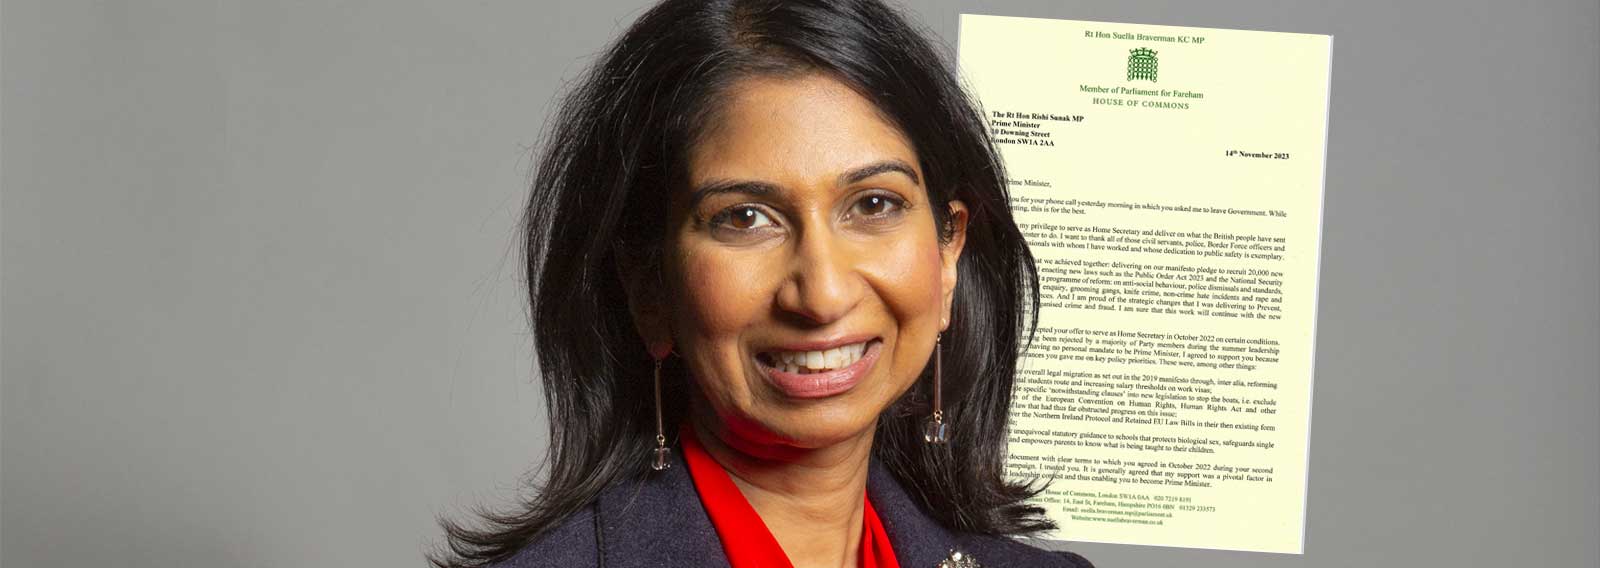 The Boil on the Backside of the British Parliament Isn’t Suella Braverman